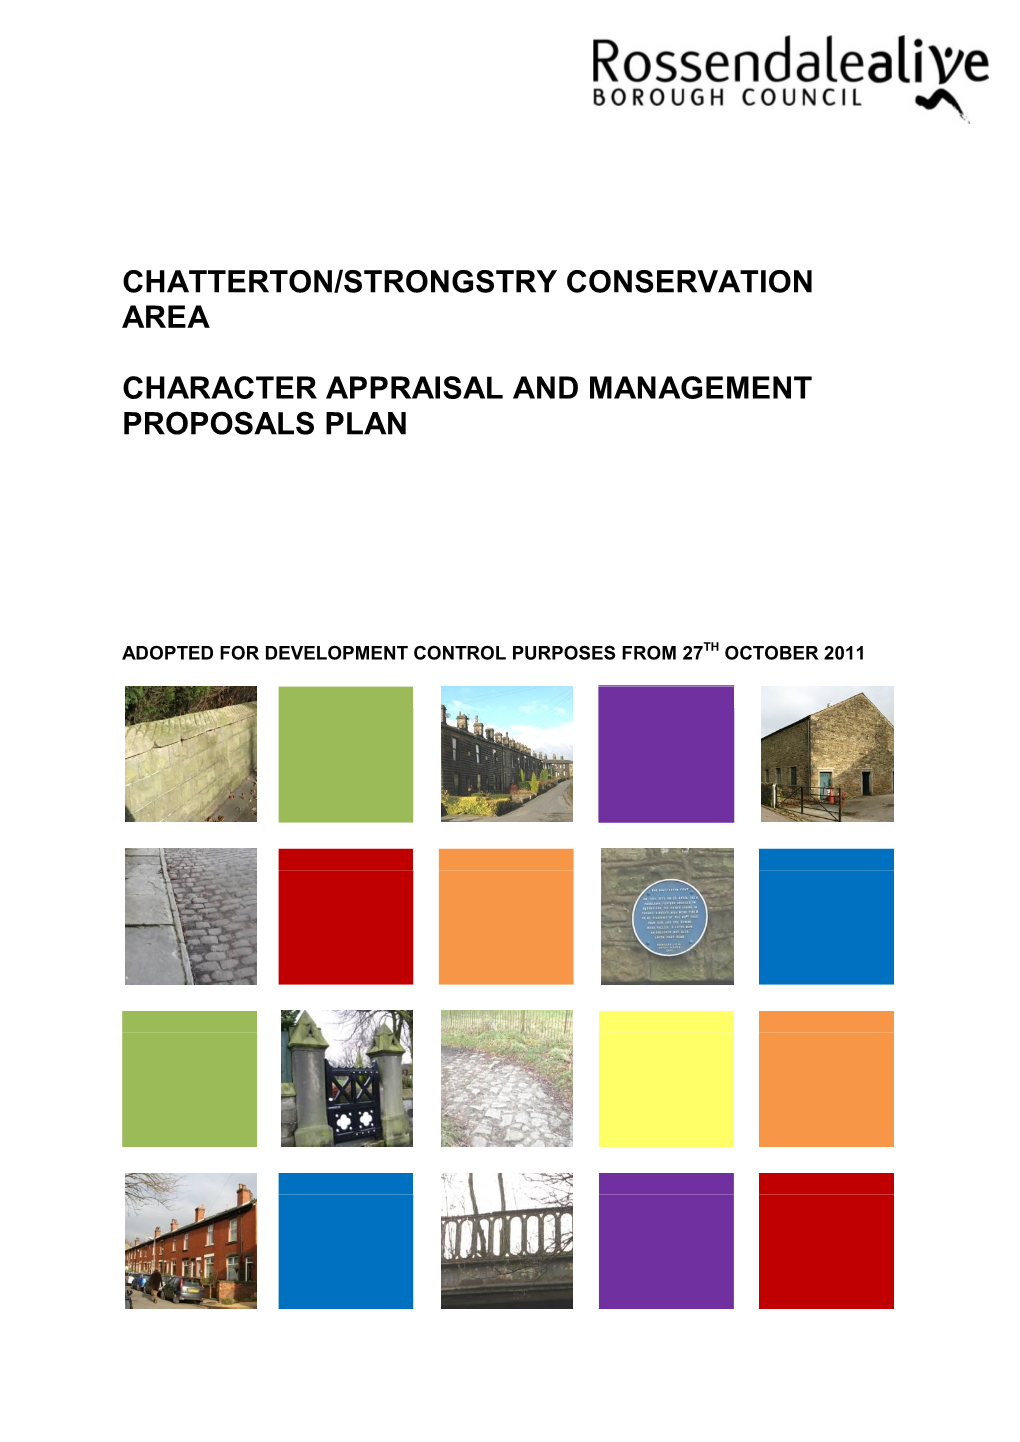 Chatterton/Strongstry Conservation Area Character Appraisal And